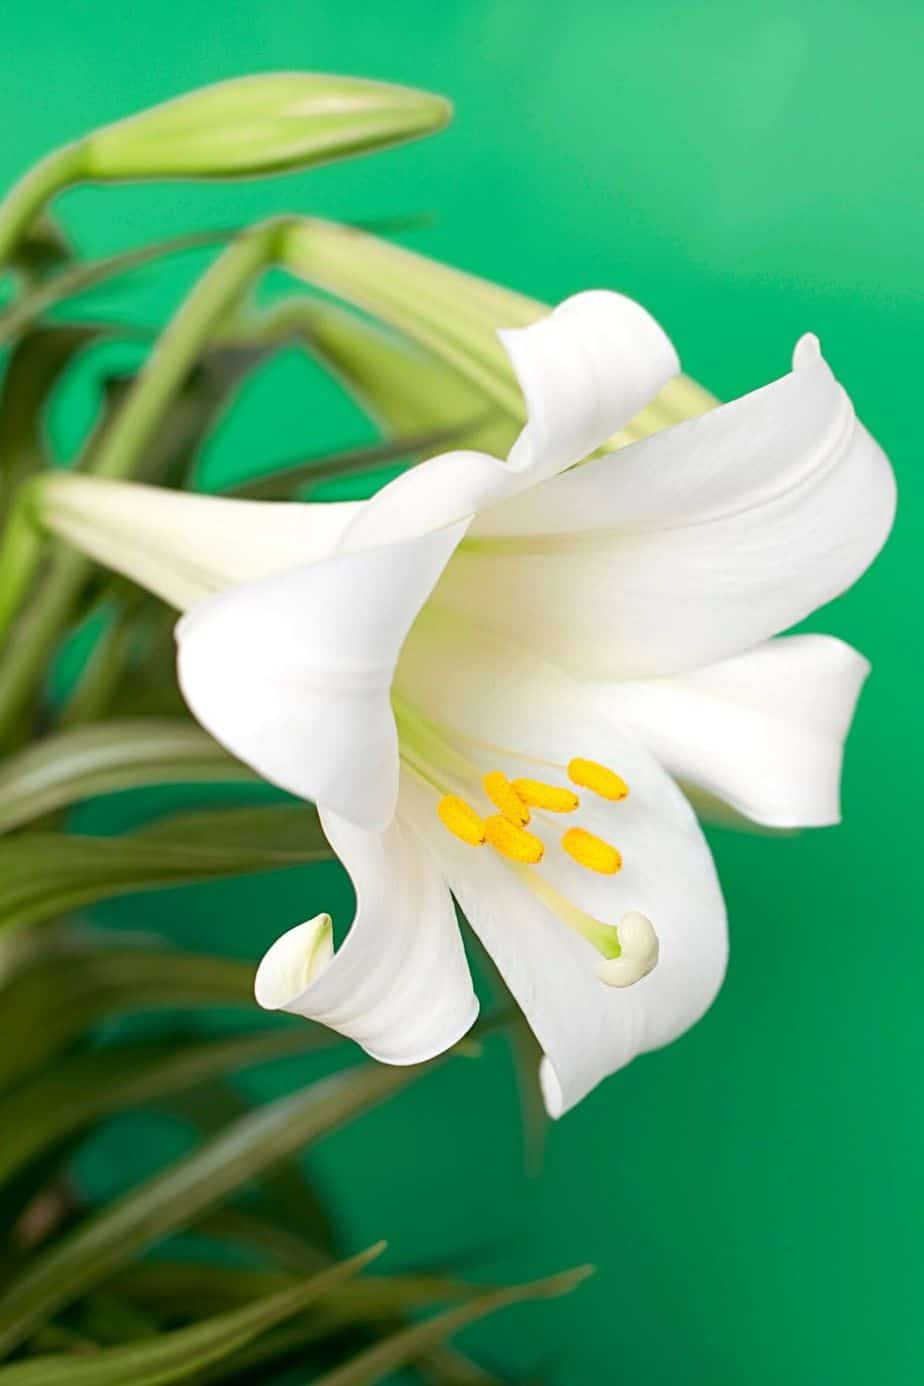 Easter Lily, a commonly-gifted plant for indoor growth, is toxic for your cats